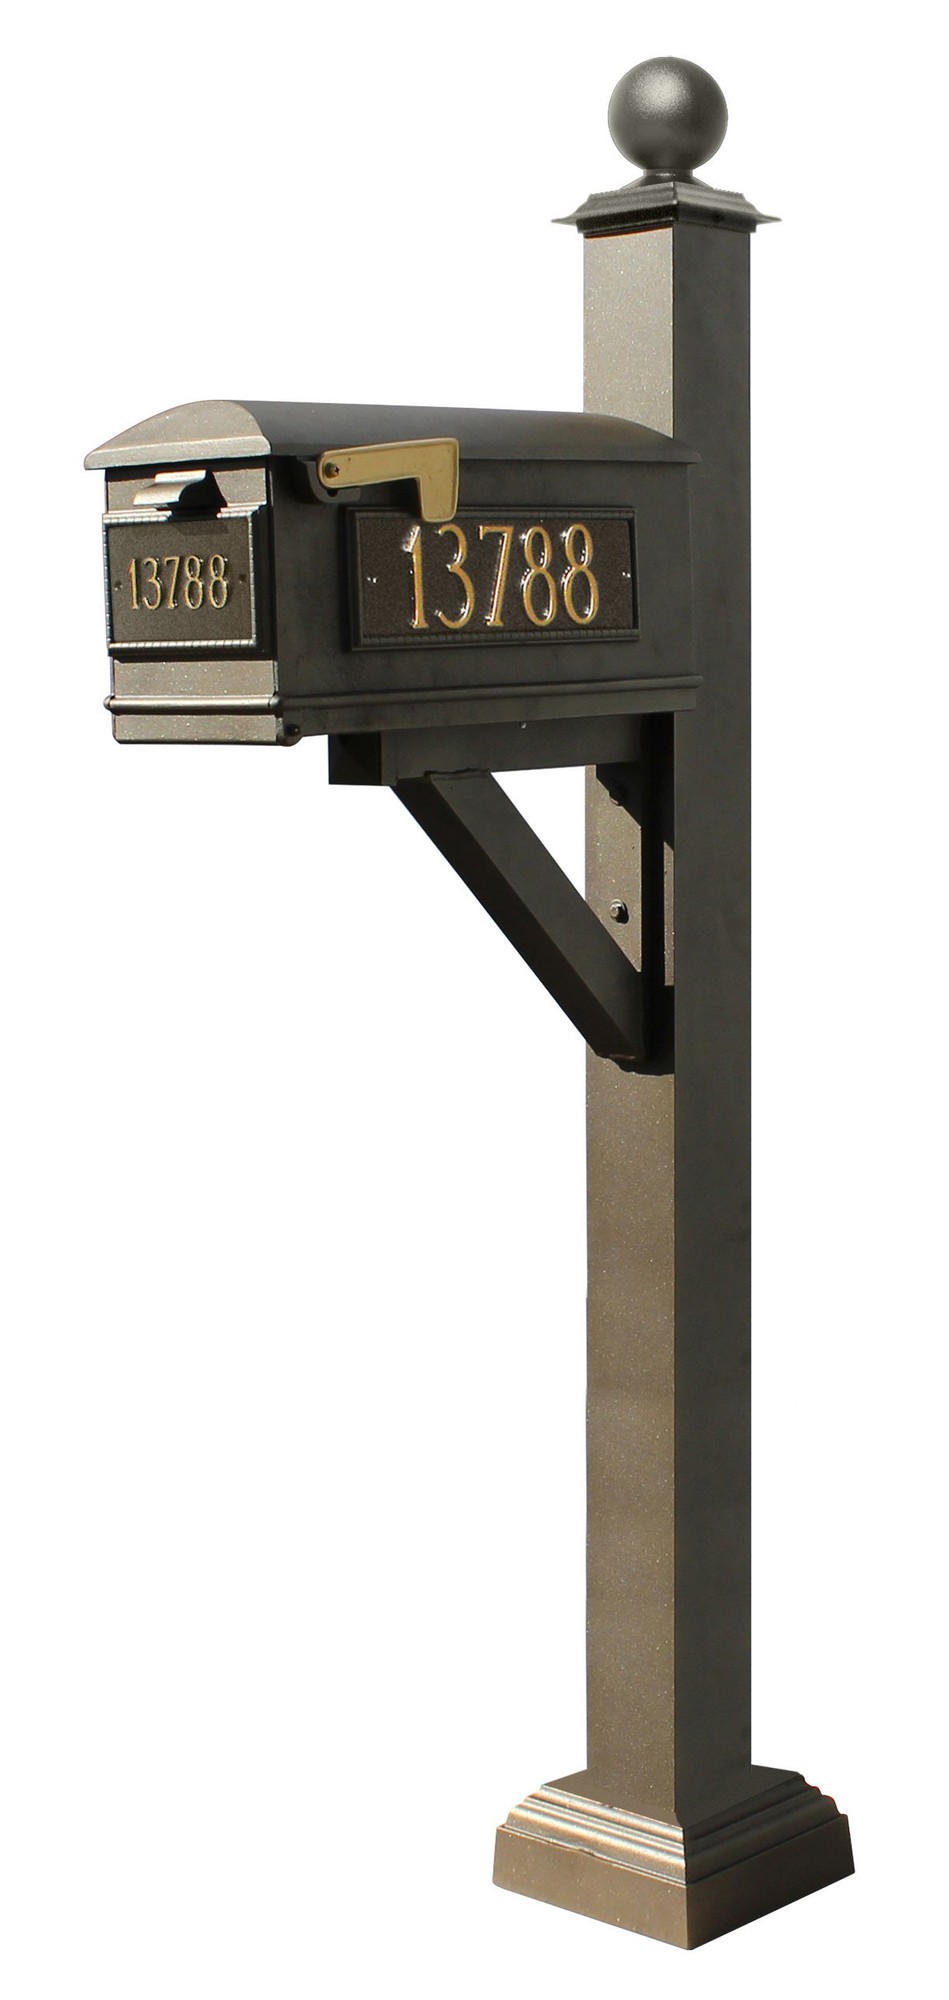 Westhaven System with Lewiston Mailbox, (3 Cast Plates) Square Collar & Large Ball Finial in (Bronze)